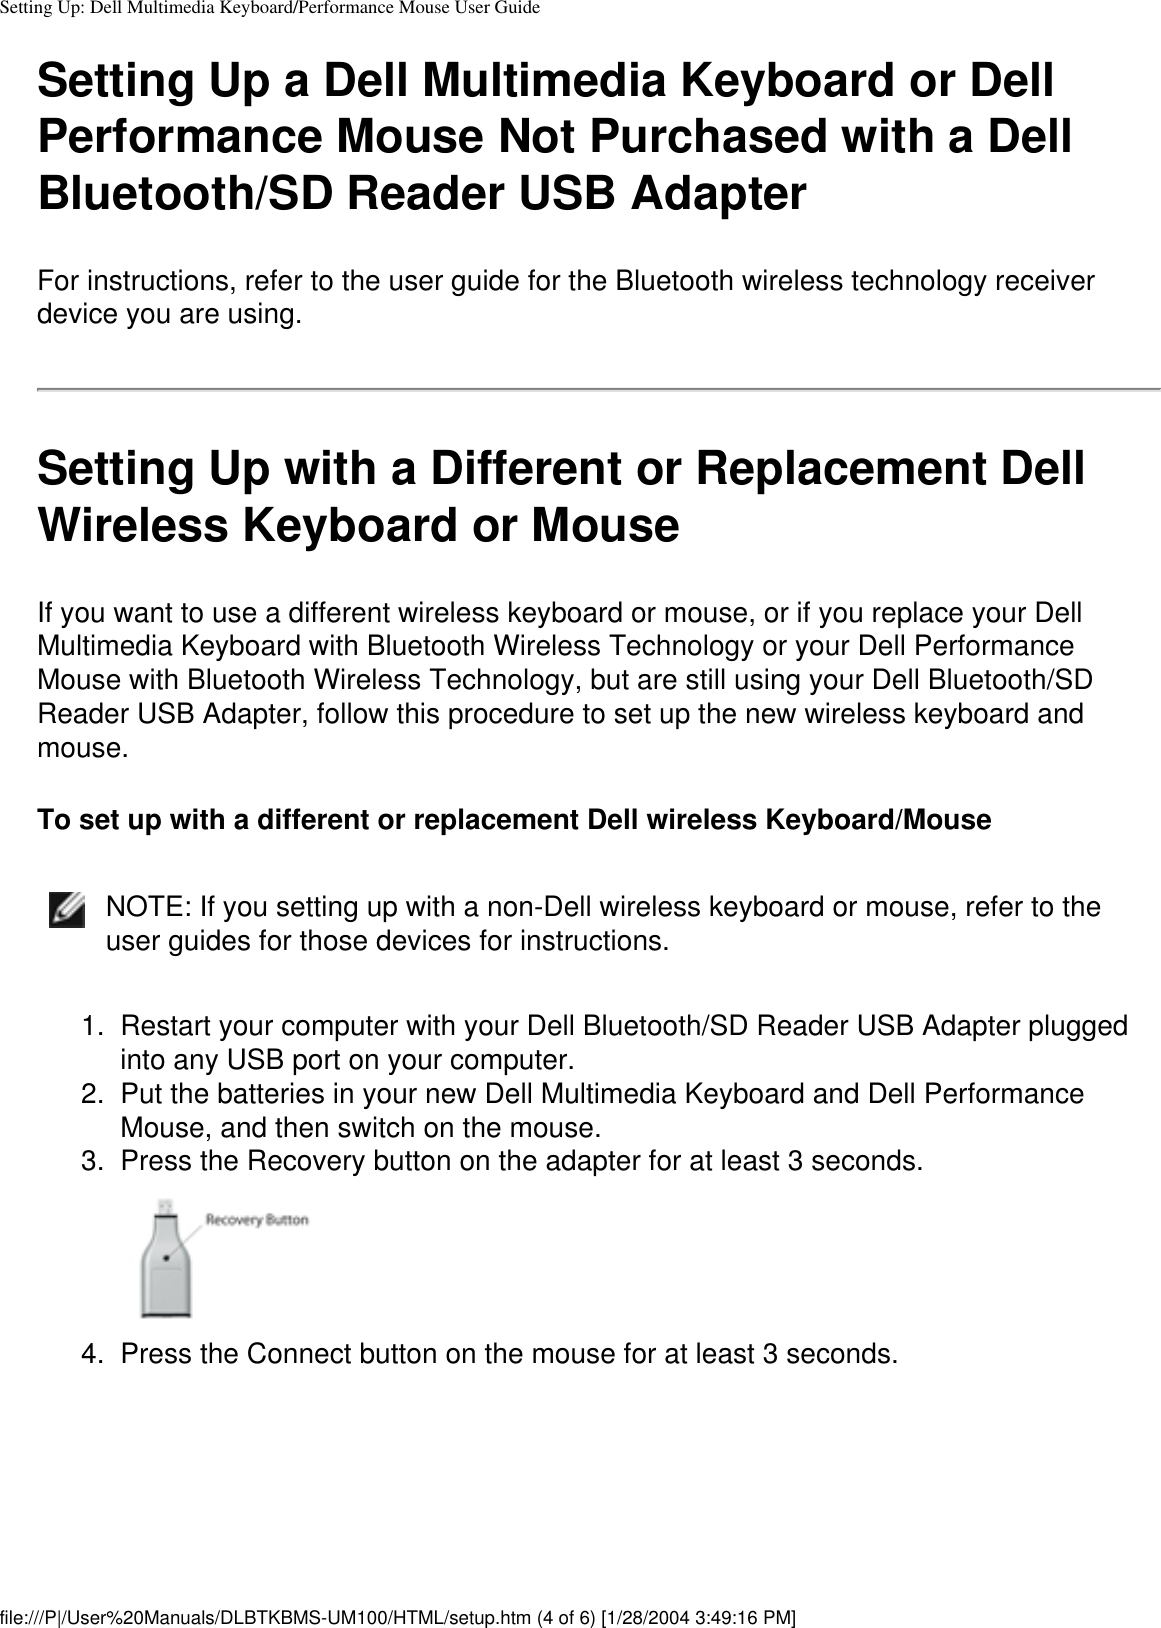 Setting Up: Dell Multimedia Keyboard/Performance Mouse User GuideSetting Up a Dell Multimedia Keyboard or Dell Performance Mouse Not Purchased with a Dell Bluetooth/SD Reader USB AdapterFor instructions, refer to the user guide for the Bluetooth wireless technology receiver device you are using.Setting Up with a Different or Replacement Dell Wireless Keyboard or MouseIf you want to use a different wireless keyboard or mouse, or if you replace your Dell Multimedia Keyboard with Bluetooth Wireless Technology or your Dell Performance Mouse with Bluetooth Wireless Technology, but are still using your Dell Bluetooth/SD Reader USB Adapter, follow this procedure to set up the new wireless keyboard and mouse.To set up with a different or replacement Dell wireless Keyboard/MouseNOTE: If you setting up with a non-Dell wireless keyboard or mouse, refer to the user guides for those devices for instructions.1.  Restart your computer with your Dell Bluetooth/SD Reader USB Adapter plugged into any USB port on your computer.2.  Put the batteries in your new Dell Multimedia Keyboard and Dell Performance Mouse, and then switch on the mouse. 3.  Press the Recovery button on the adapter for at least 3 seconds. 4.  Press the Connect button on the mouse for at least 3 seconds. file:///P|/User%20Manuals/DLBTKBMS-UM100/HTML/setup.htm (4 of 6) [1/28/2004 3:49:16 PM]